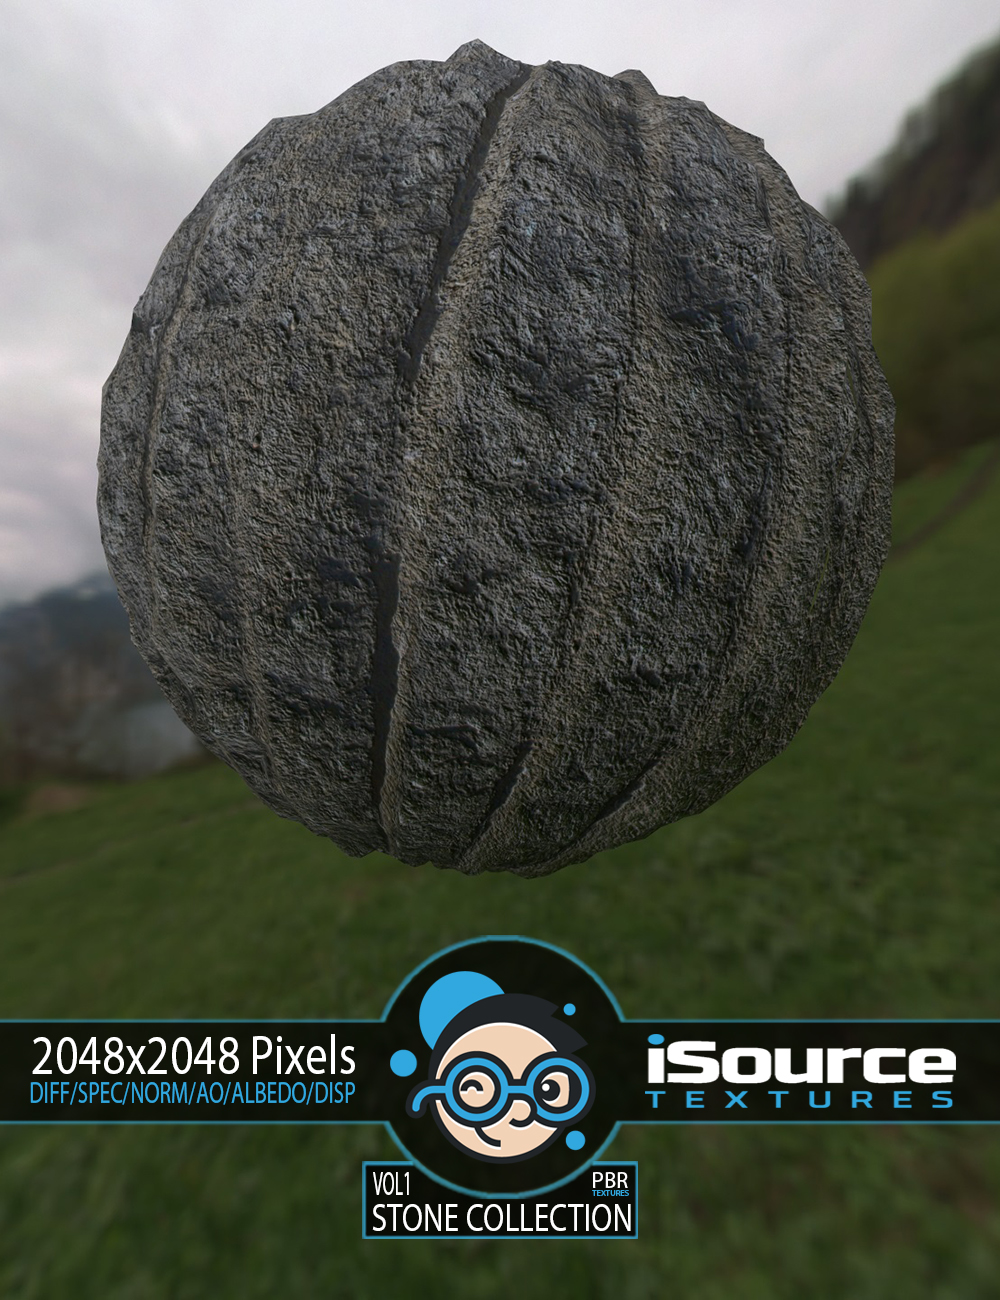 Stone Collection Merchant Resource - Vol1 (PBR Textures) by: iSourceTextures, 3D Models by Daz 3D